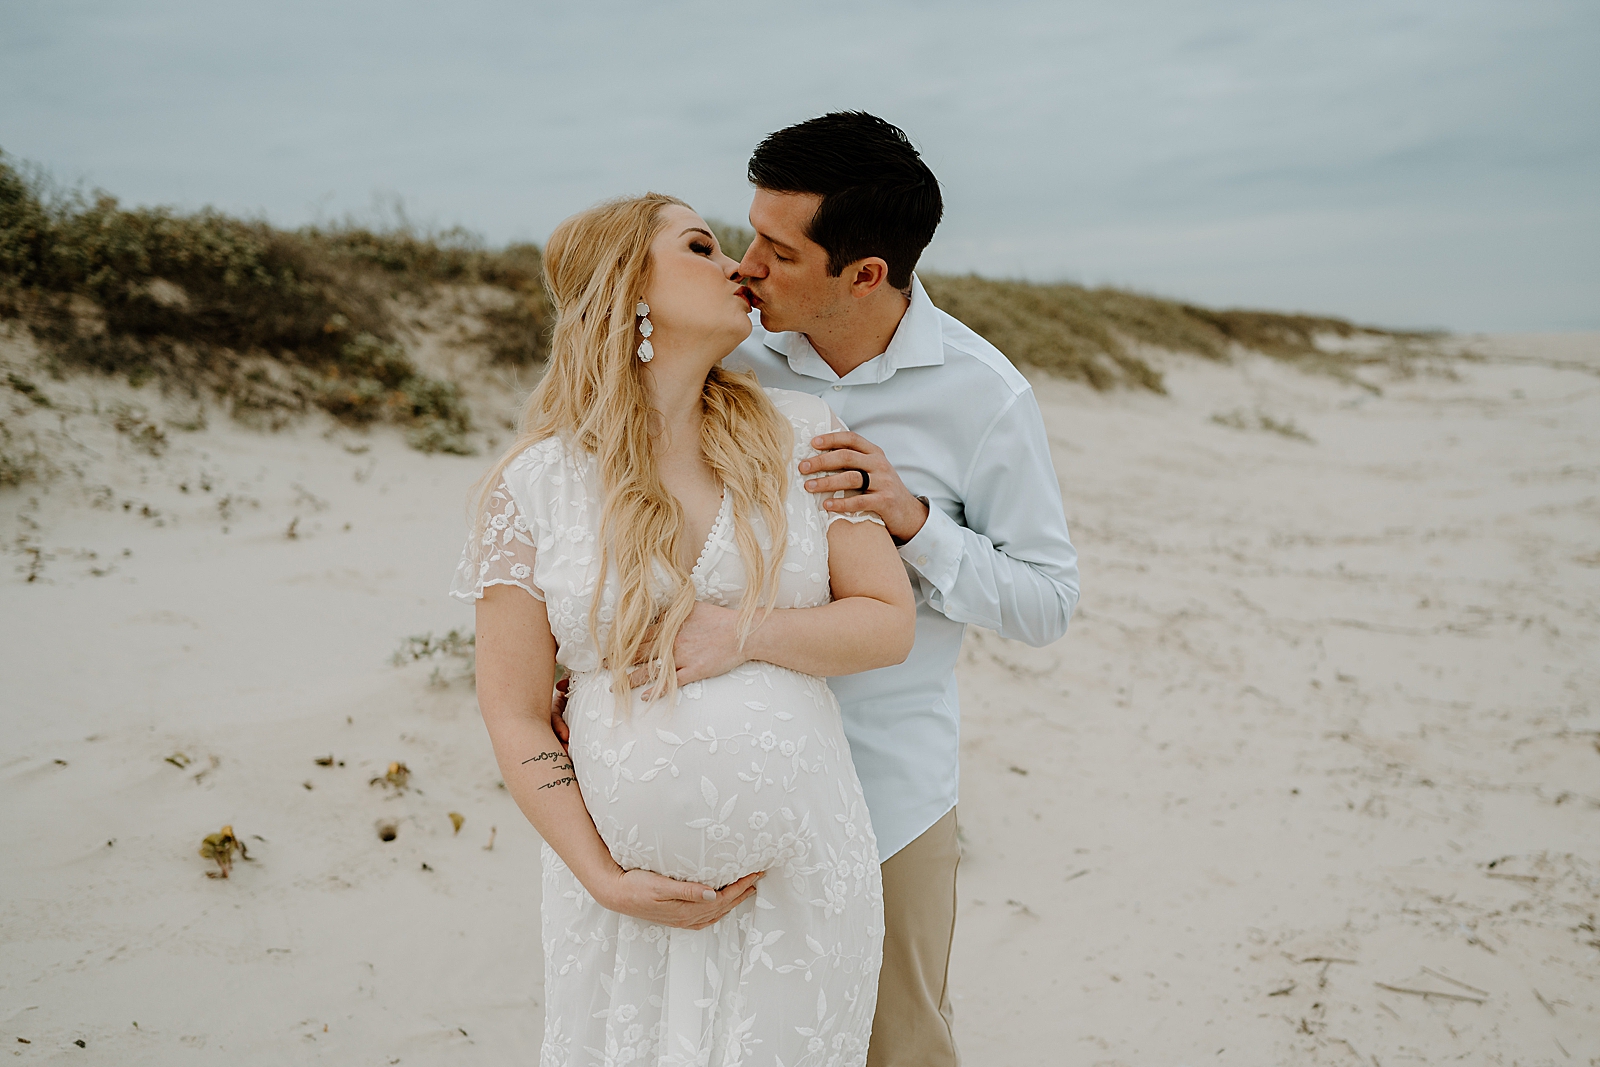 man in blue shirt kissing blonde woman in white dress holding belly bump on beach